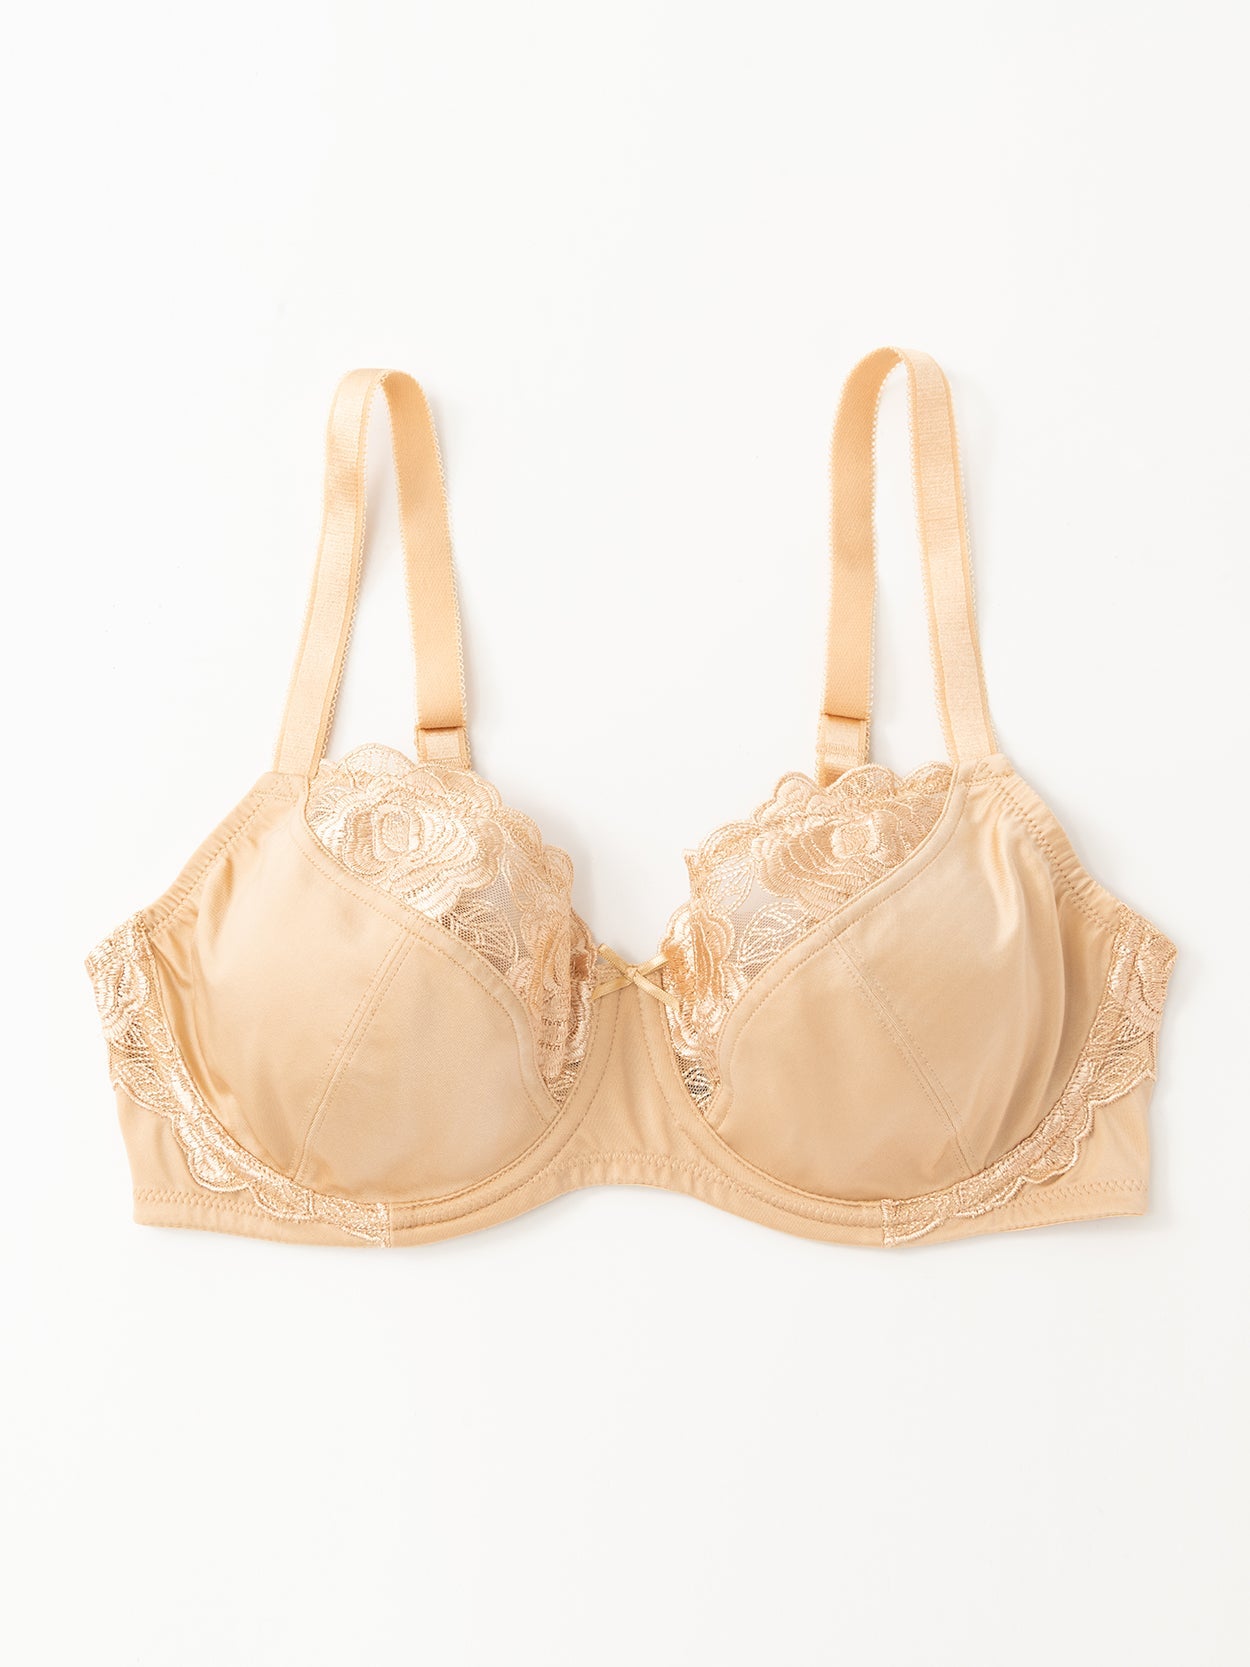 Plus Size See Through Unlined Underwire Lace Bra Nude